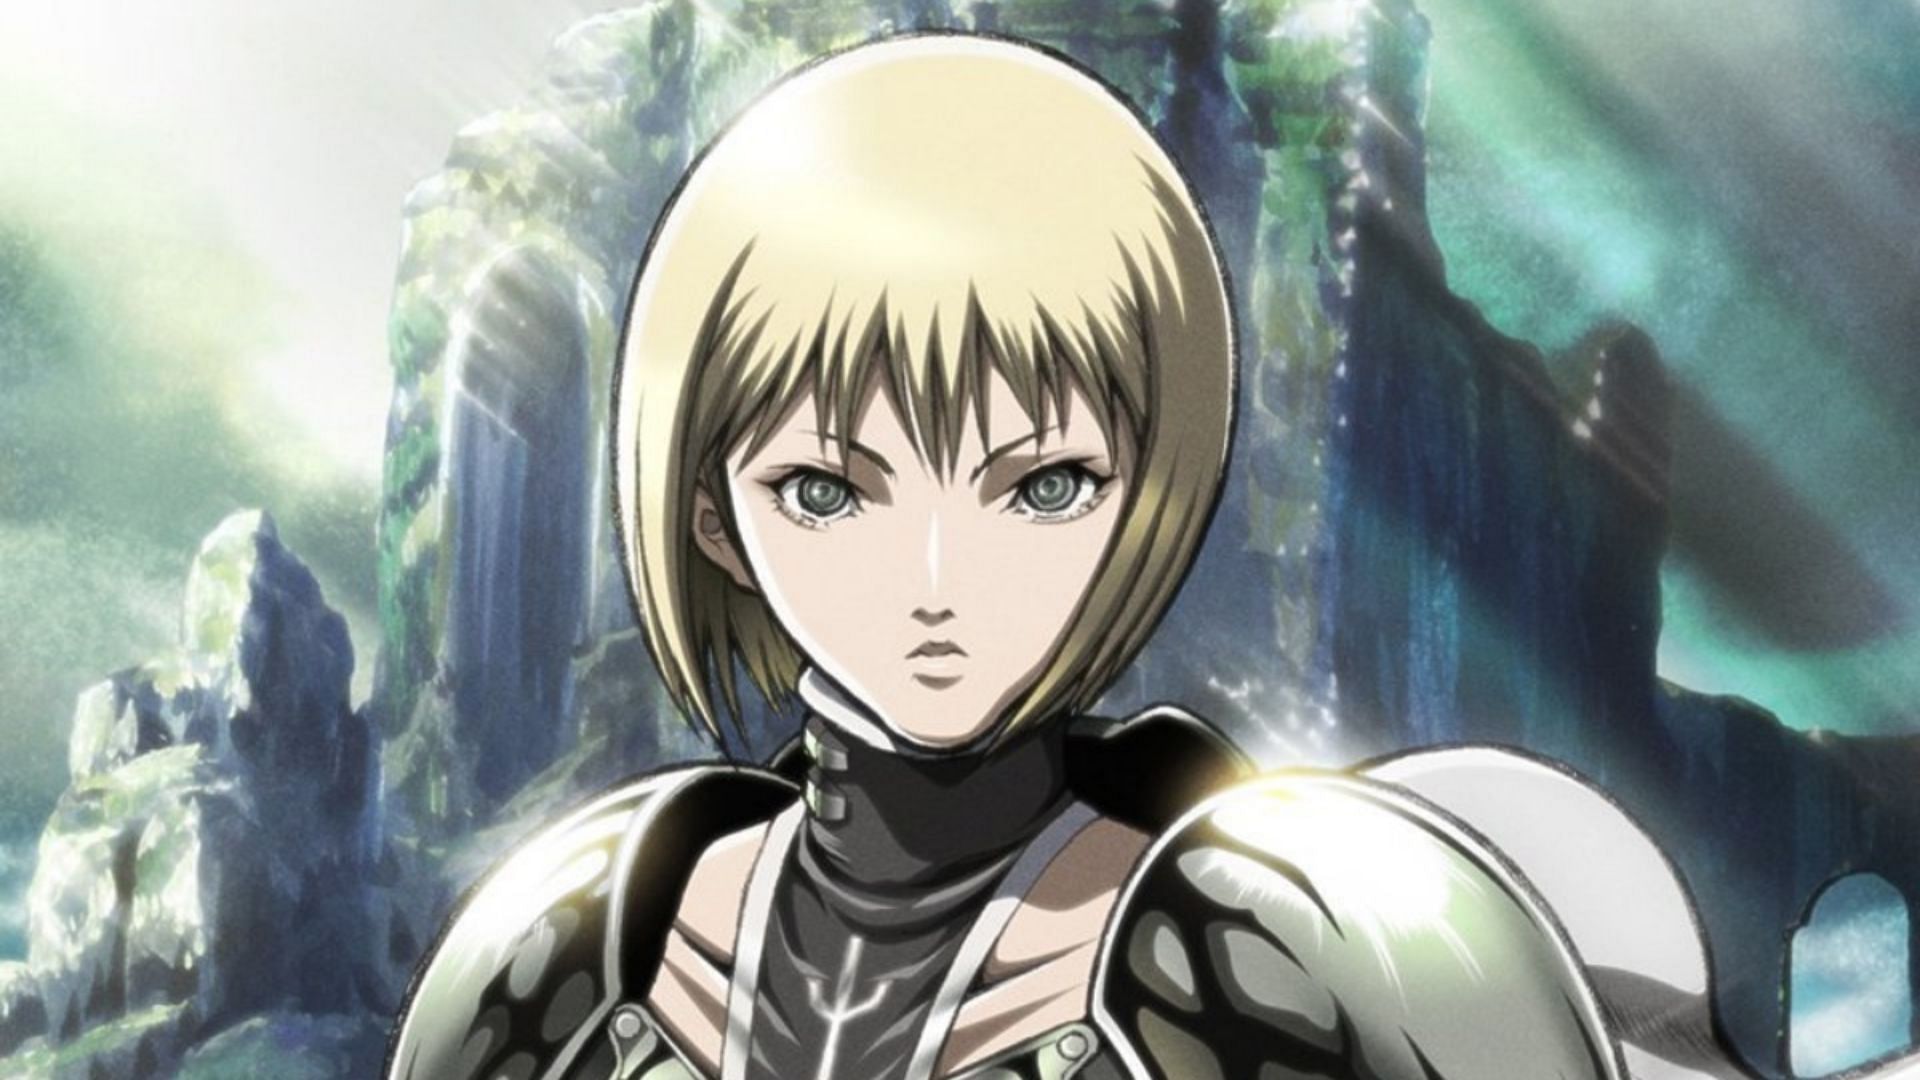 Claymore (Image via Madhouse)